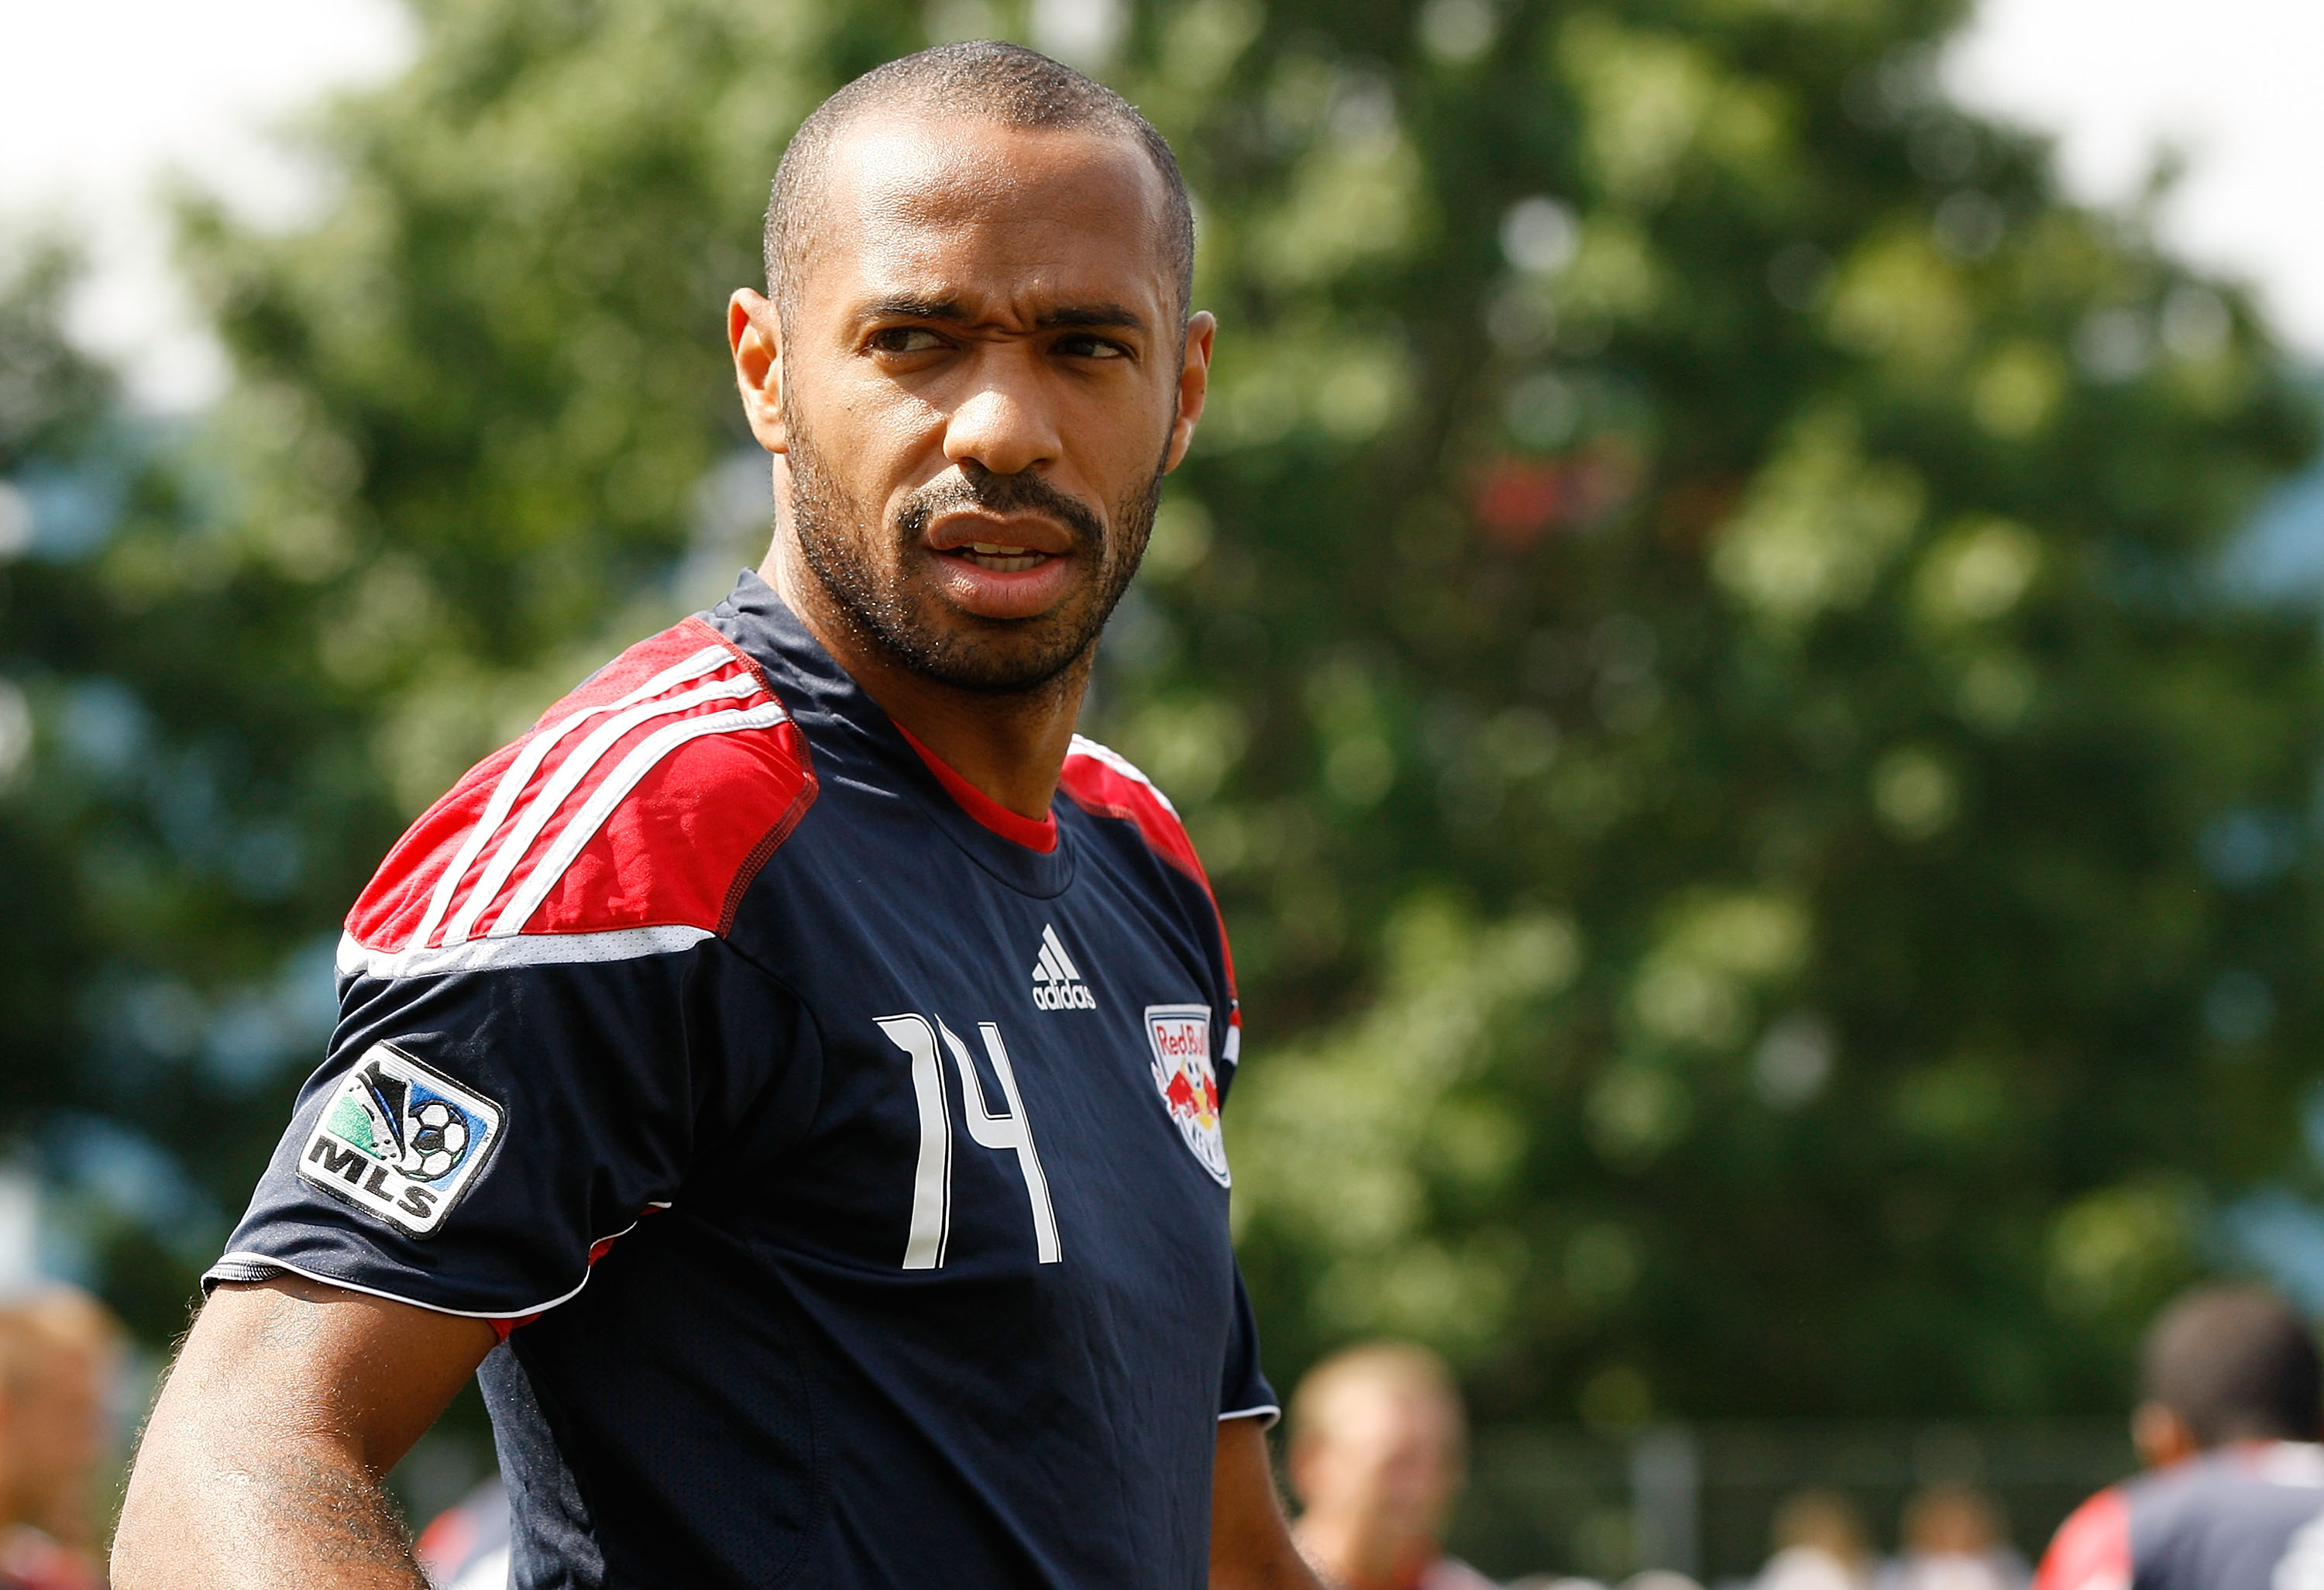 NEW YORK, NY - AUGUST 09:  Theirry Henry #14 of the New York Red Bulls during an open practise session on August 9, 2011 at Chelsea Waterside Park in New York City.  (Photo by Mike Stobe/Getty Images for New York Red Bulls)